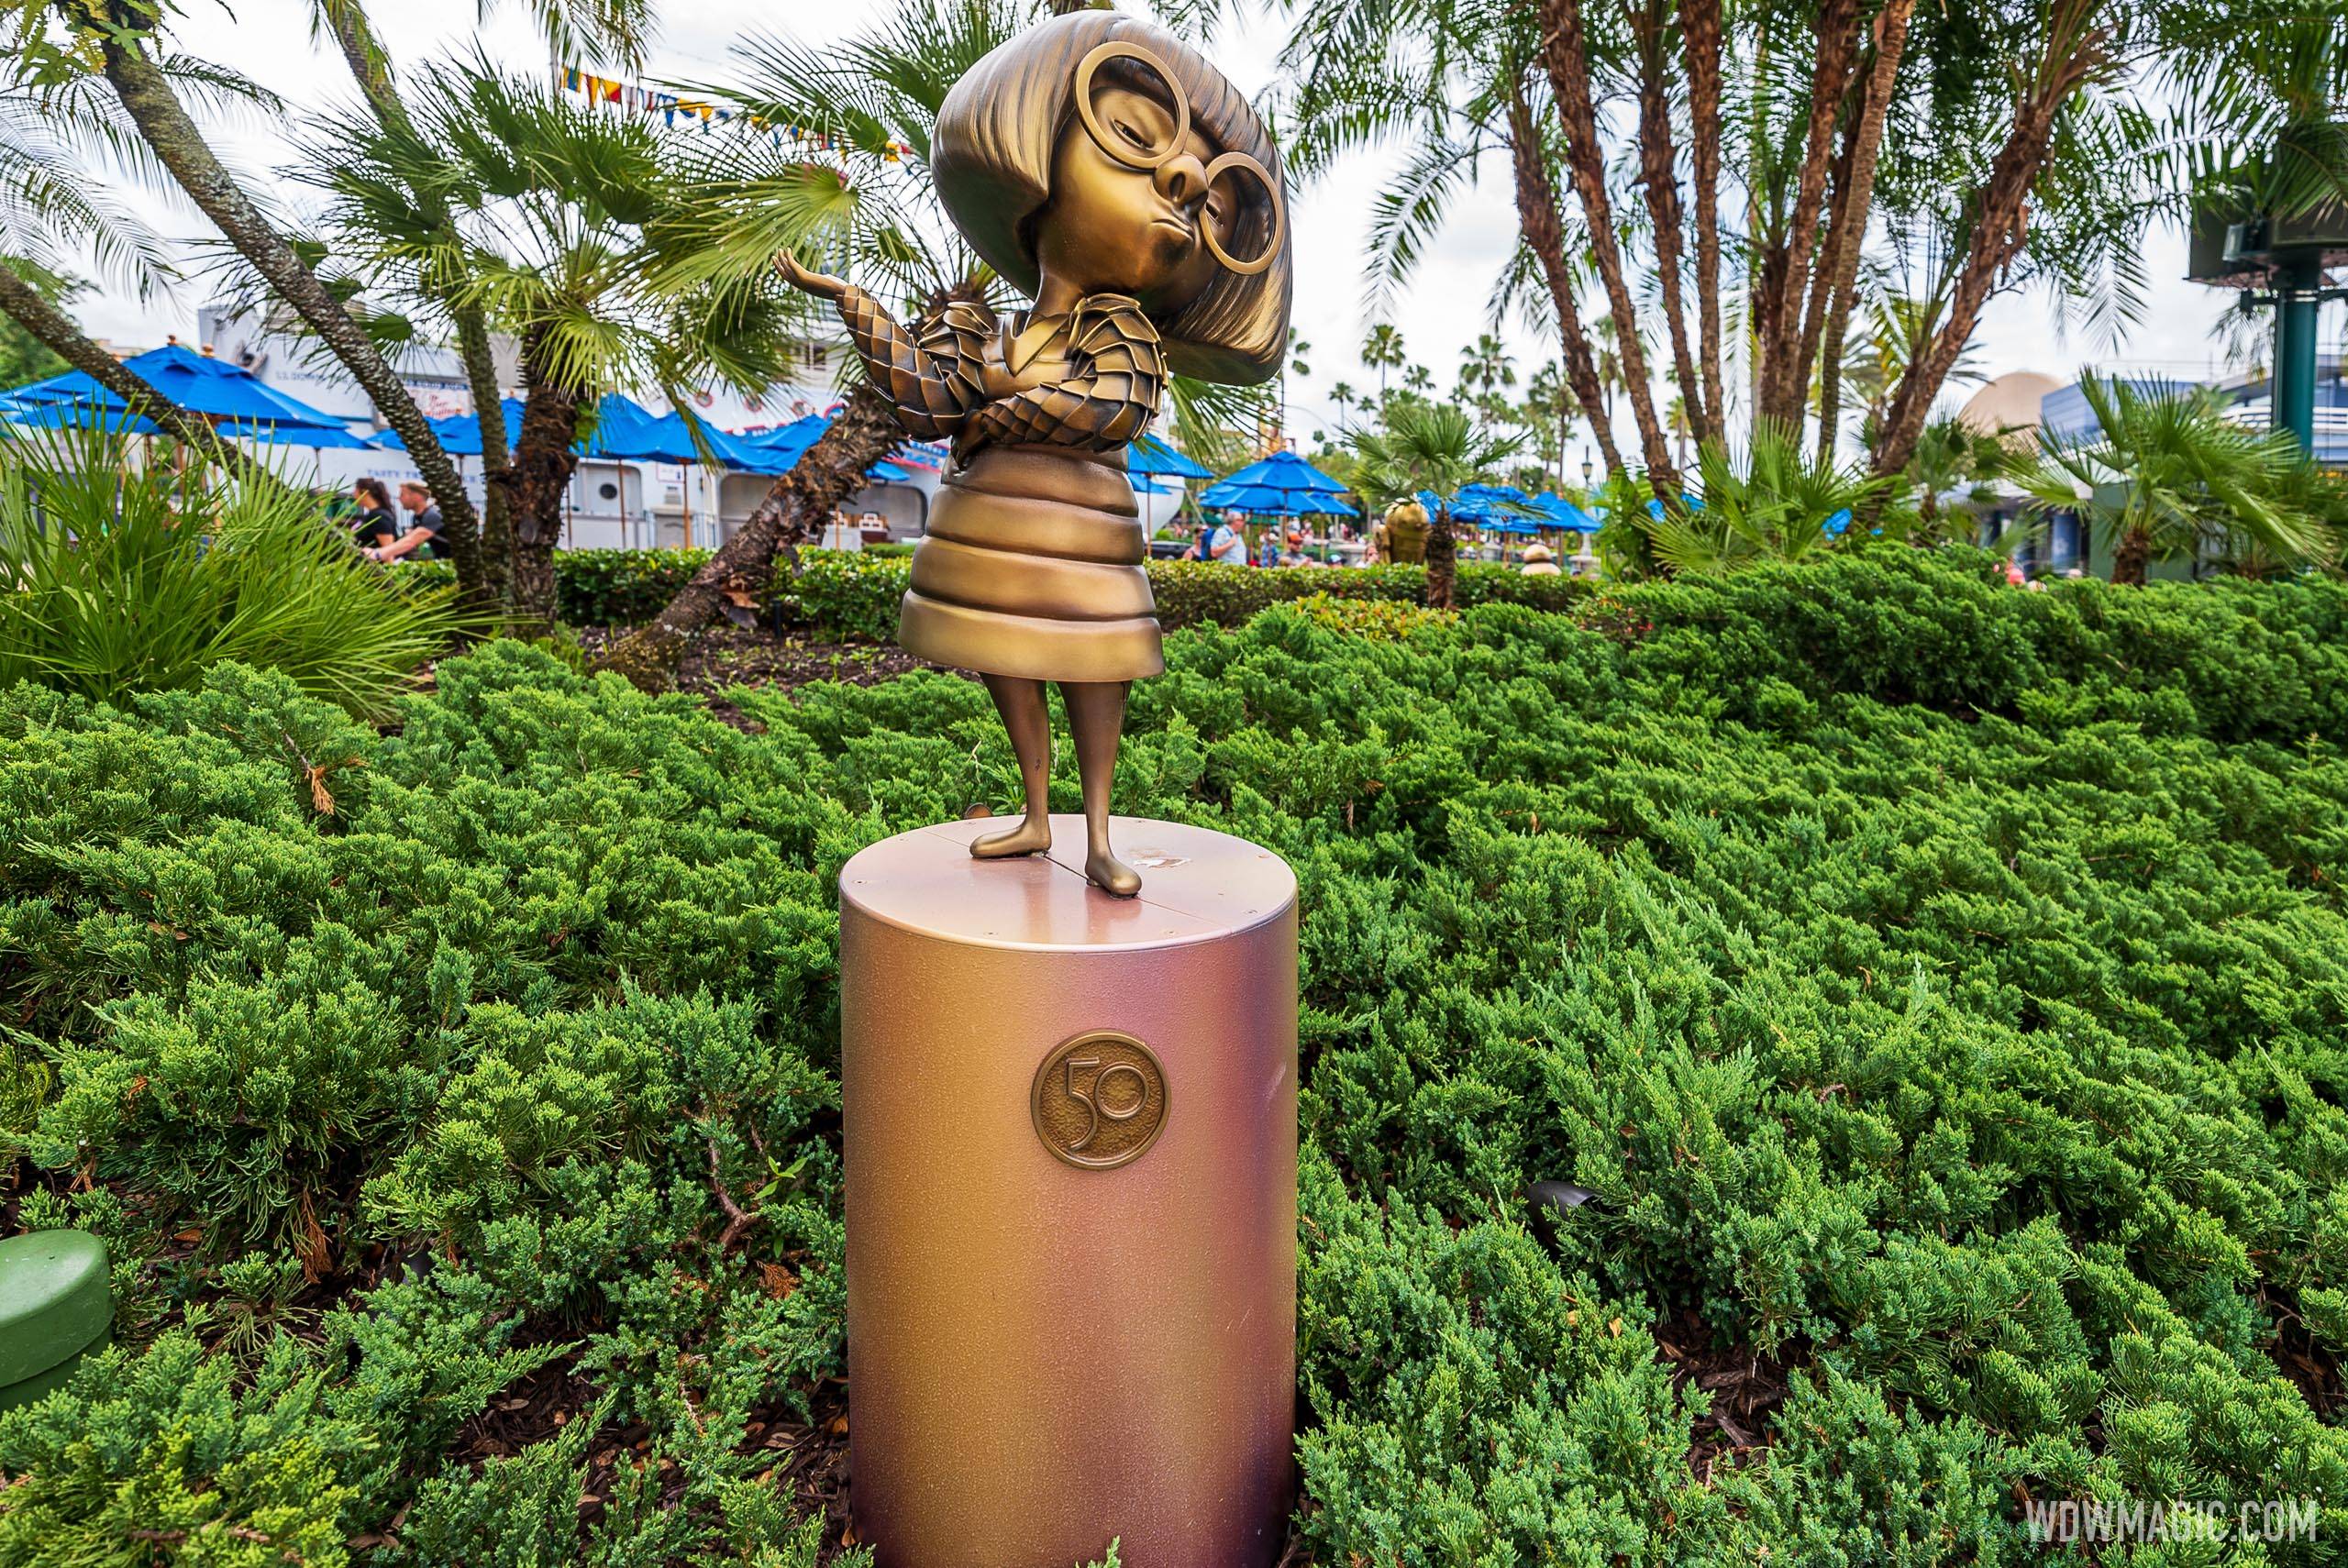 See how the MagicBand+ interacts with the Fab 50 golden character sculptures at Walt Disney World